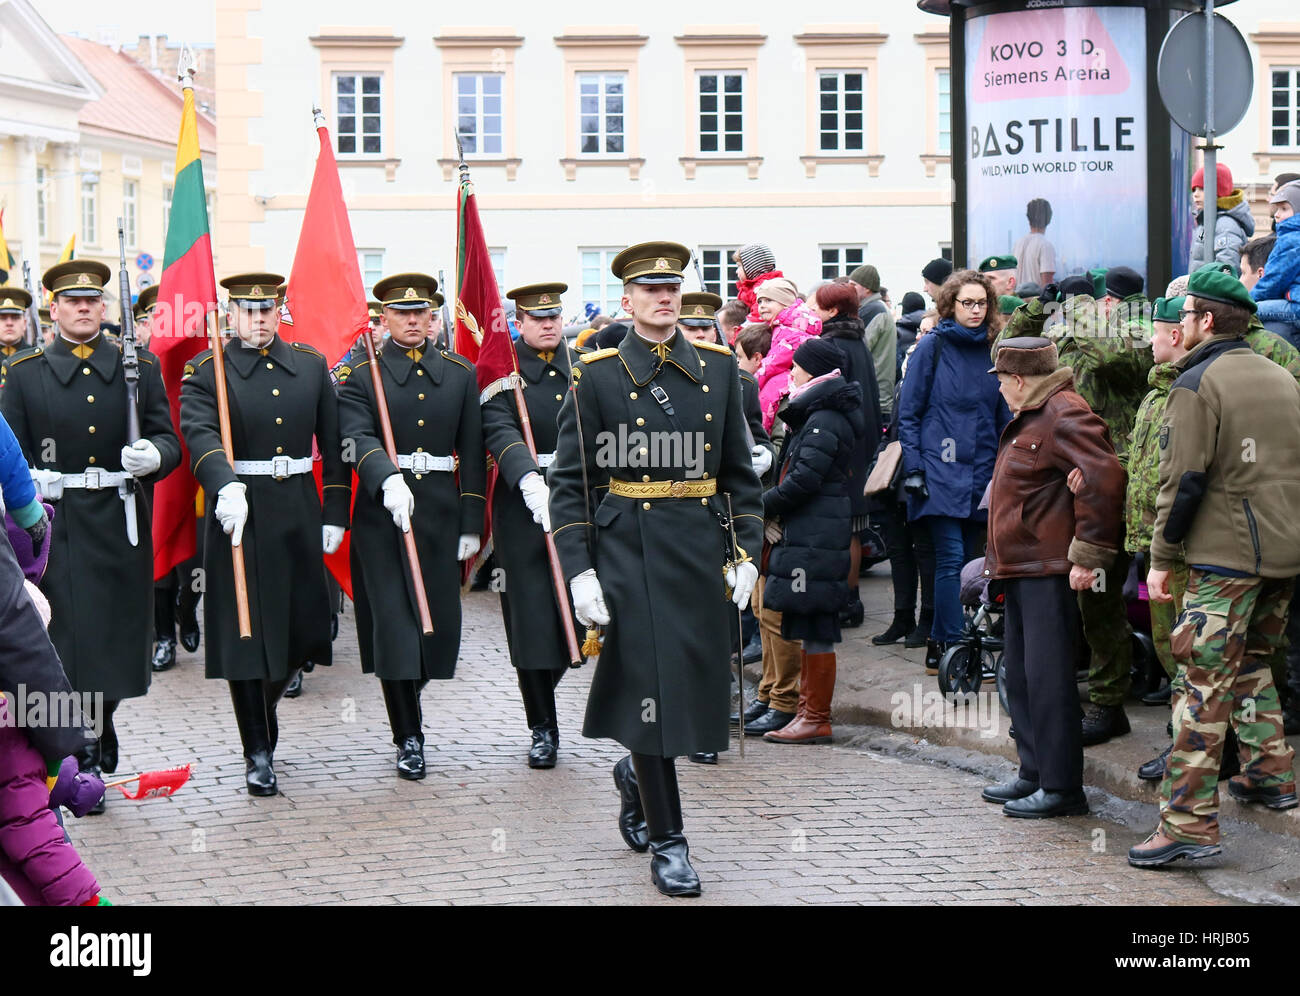 VILNIUS, LITHUANIA - FEBRUARY 16, 2017: Ccelebration of the independence of Lithuania. Lithuanian Armed Forces Officers  with respect bears a festive  Stock Photo